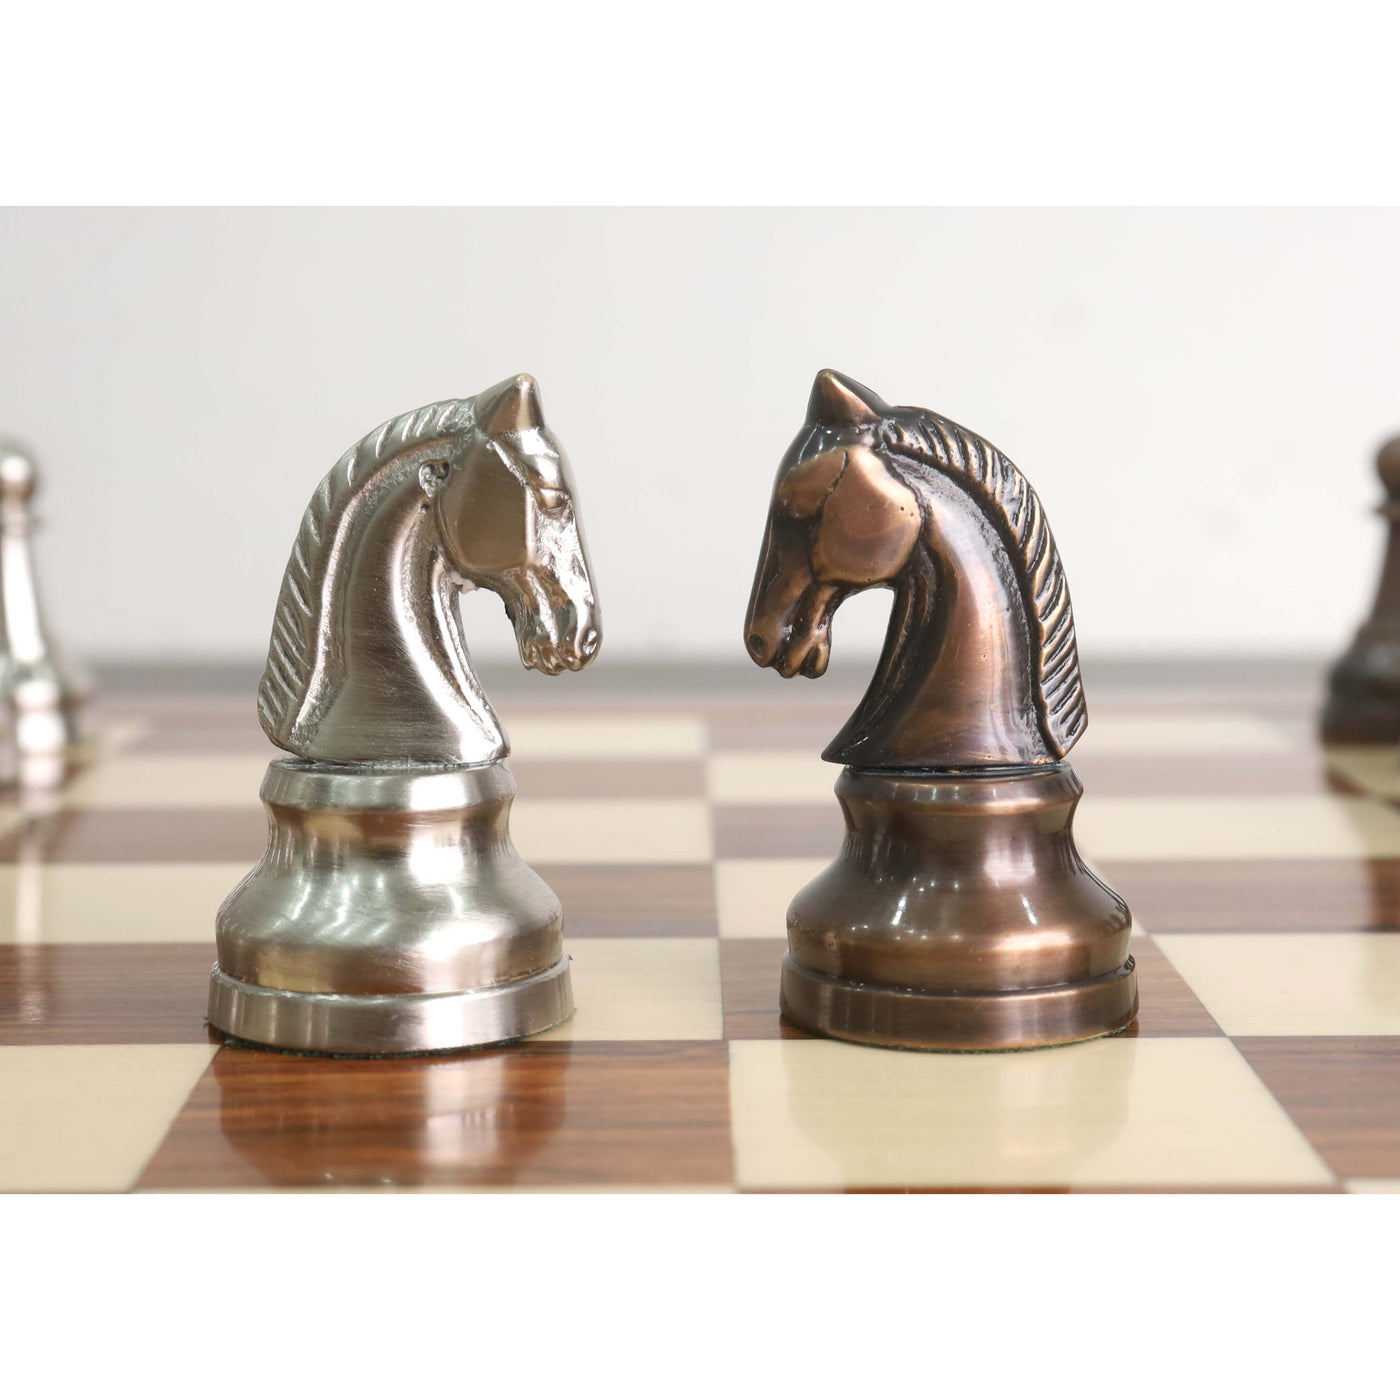 3.5" Elegance Series Brass Metal Luxury Chess Set - Chess Pieces Only- Antiqued Copper